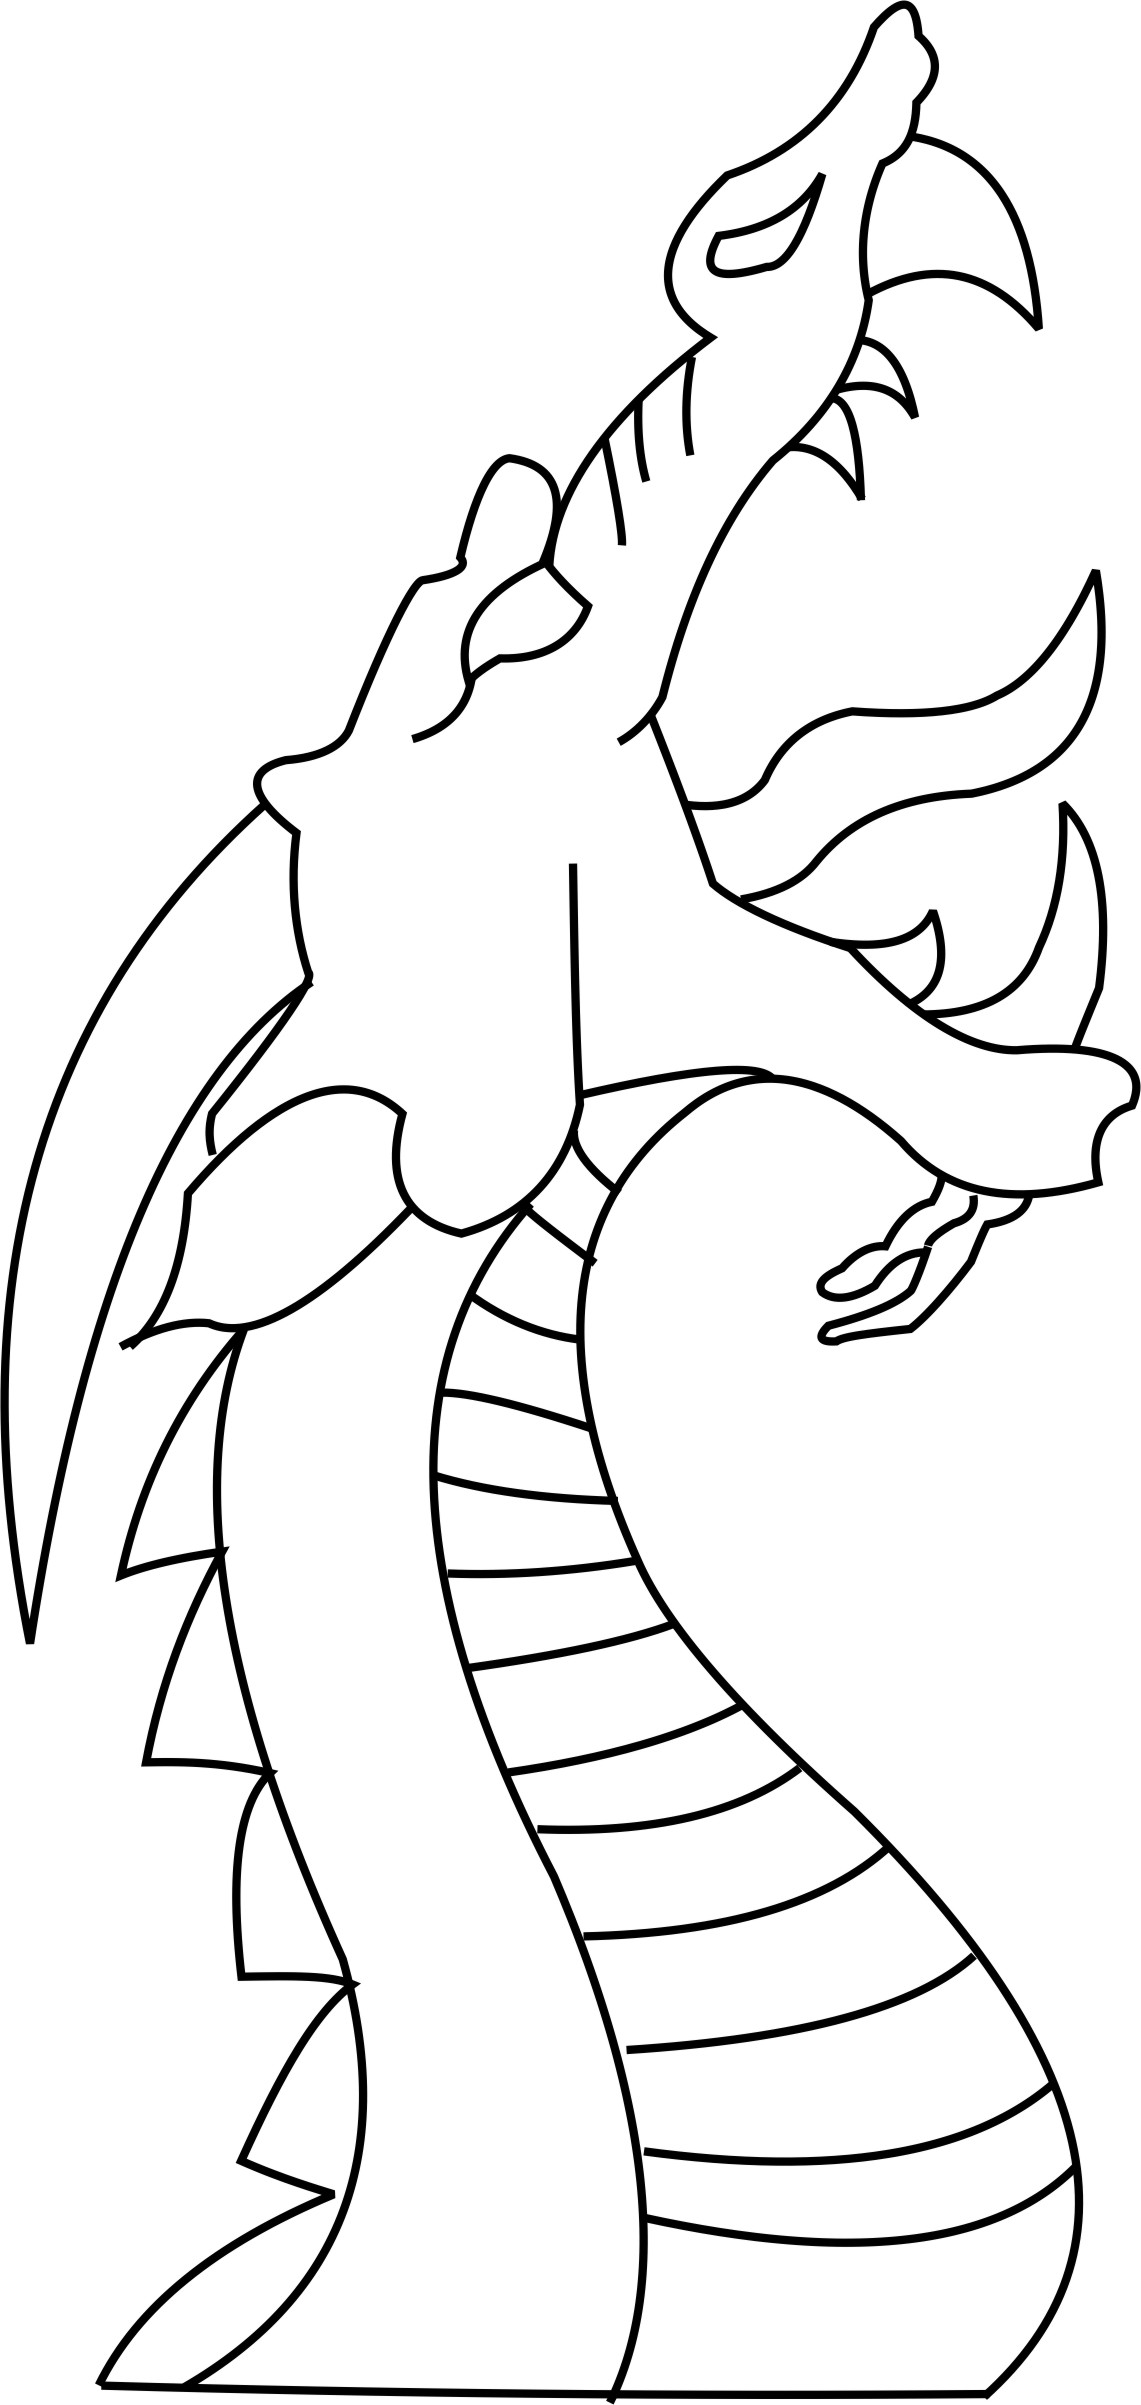 Viking Longship Colouring Pages Sketch Coloring Page